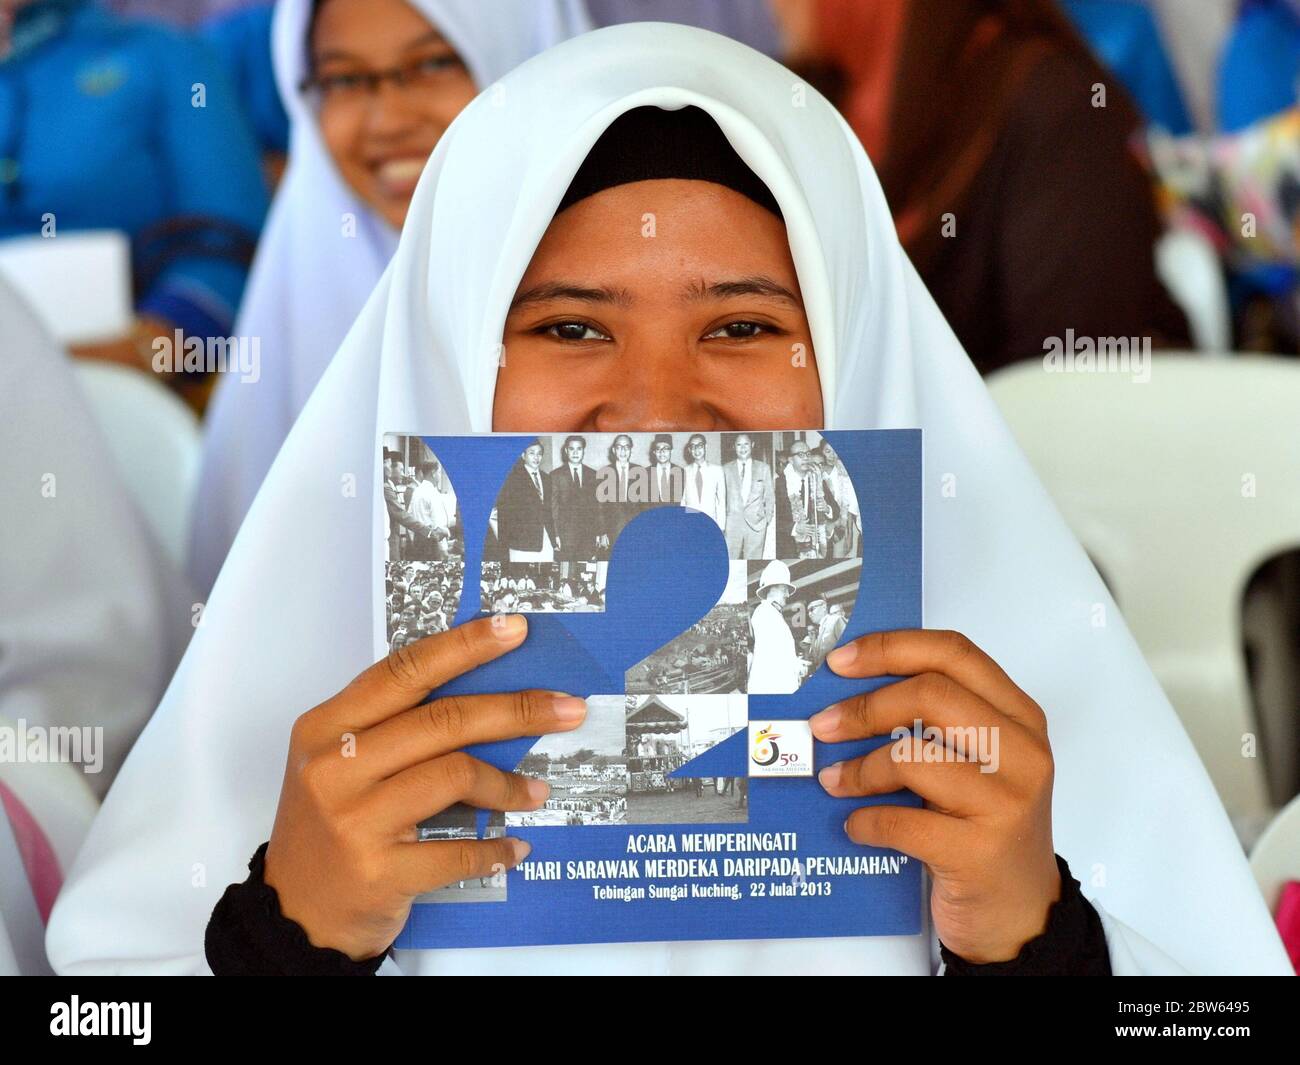 Malay Muslim girl with smiling eyes wears an Islamic school uniform and covers her mouth with a patriotic brochure. Stock Photo